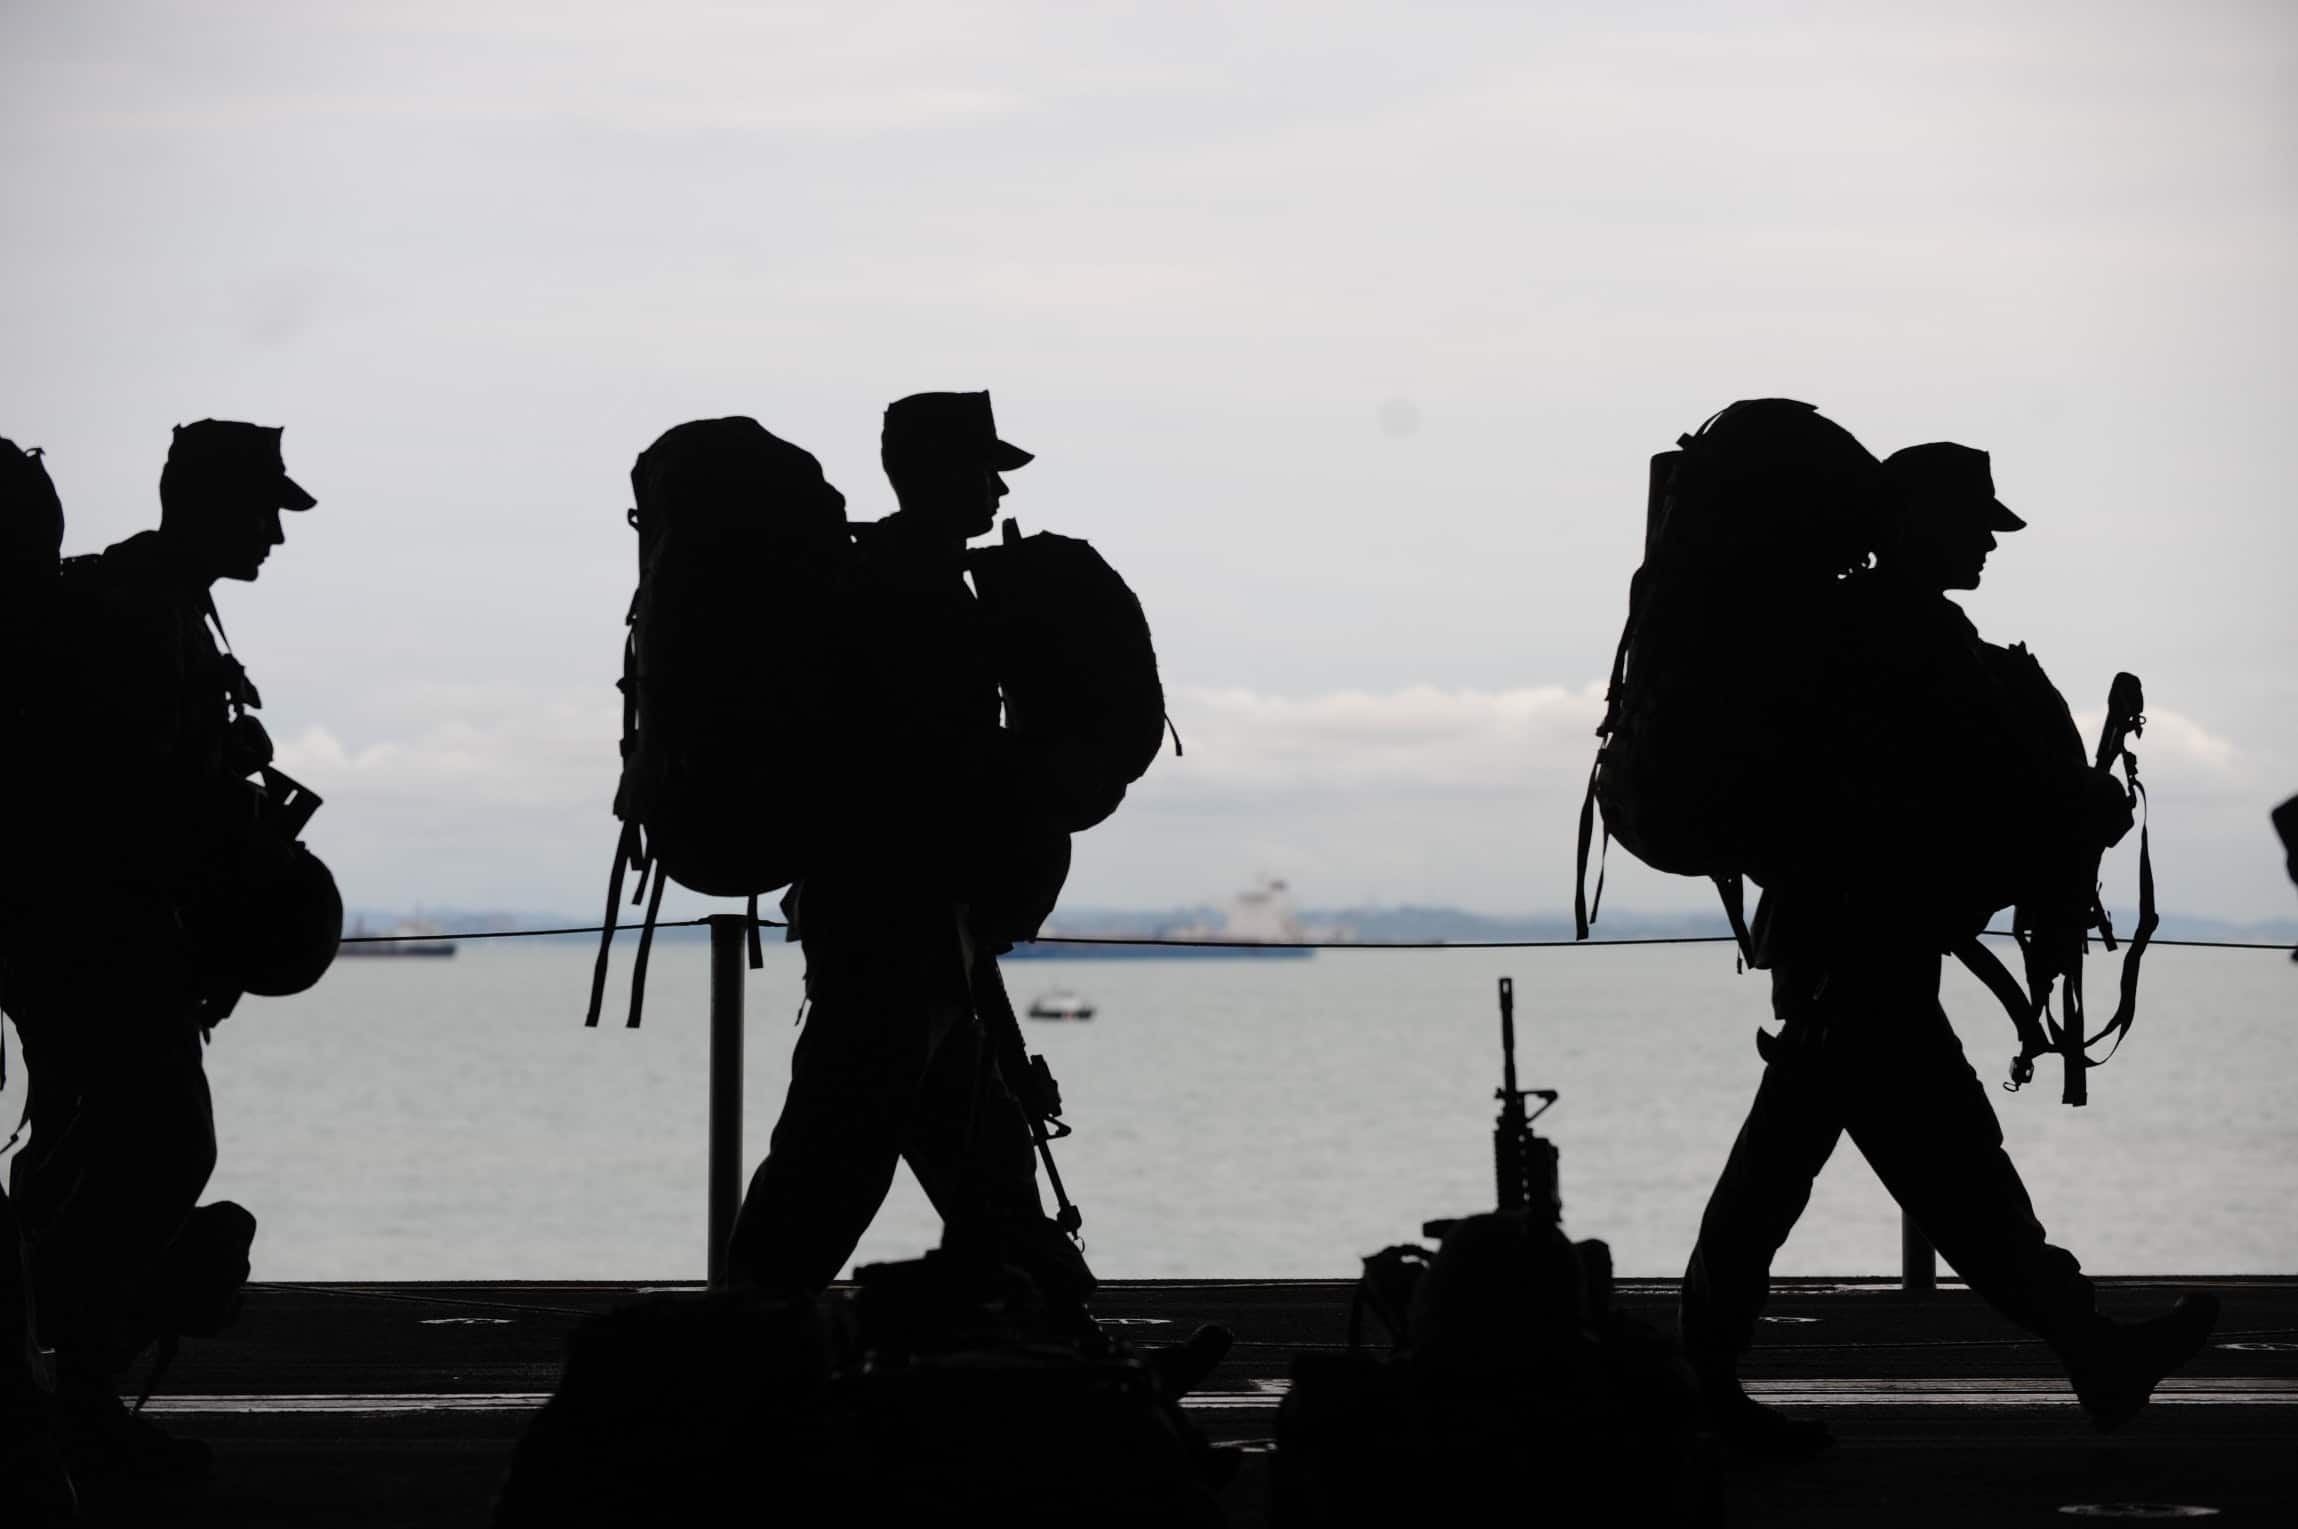 Silhouette of military soldiers walking.